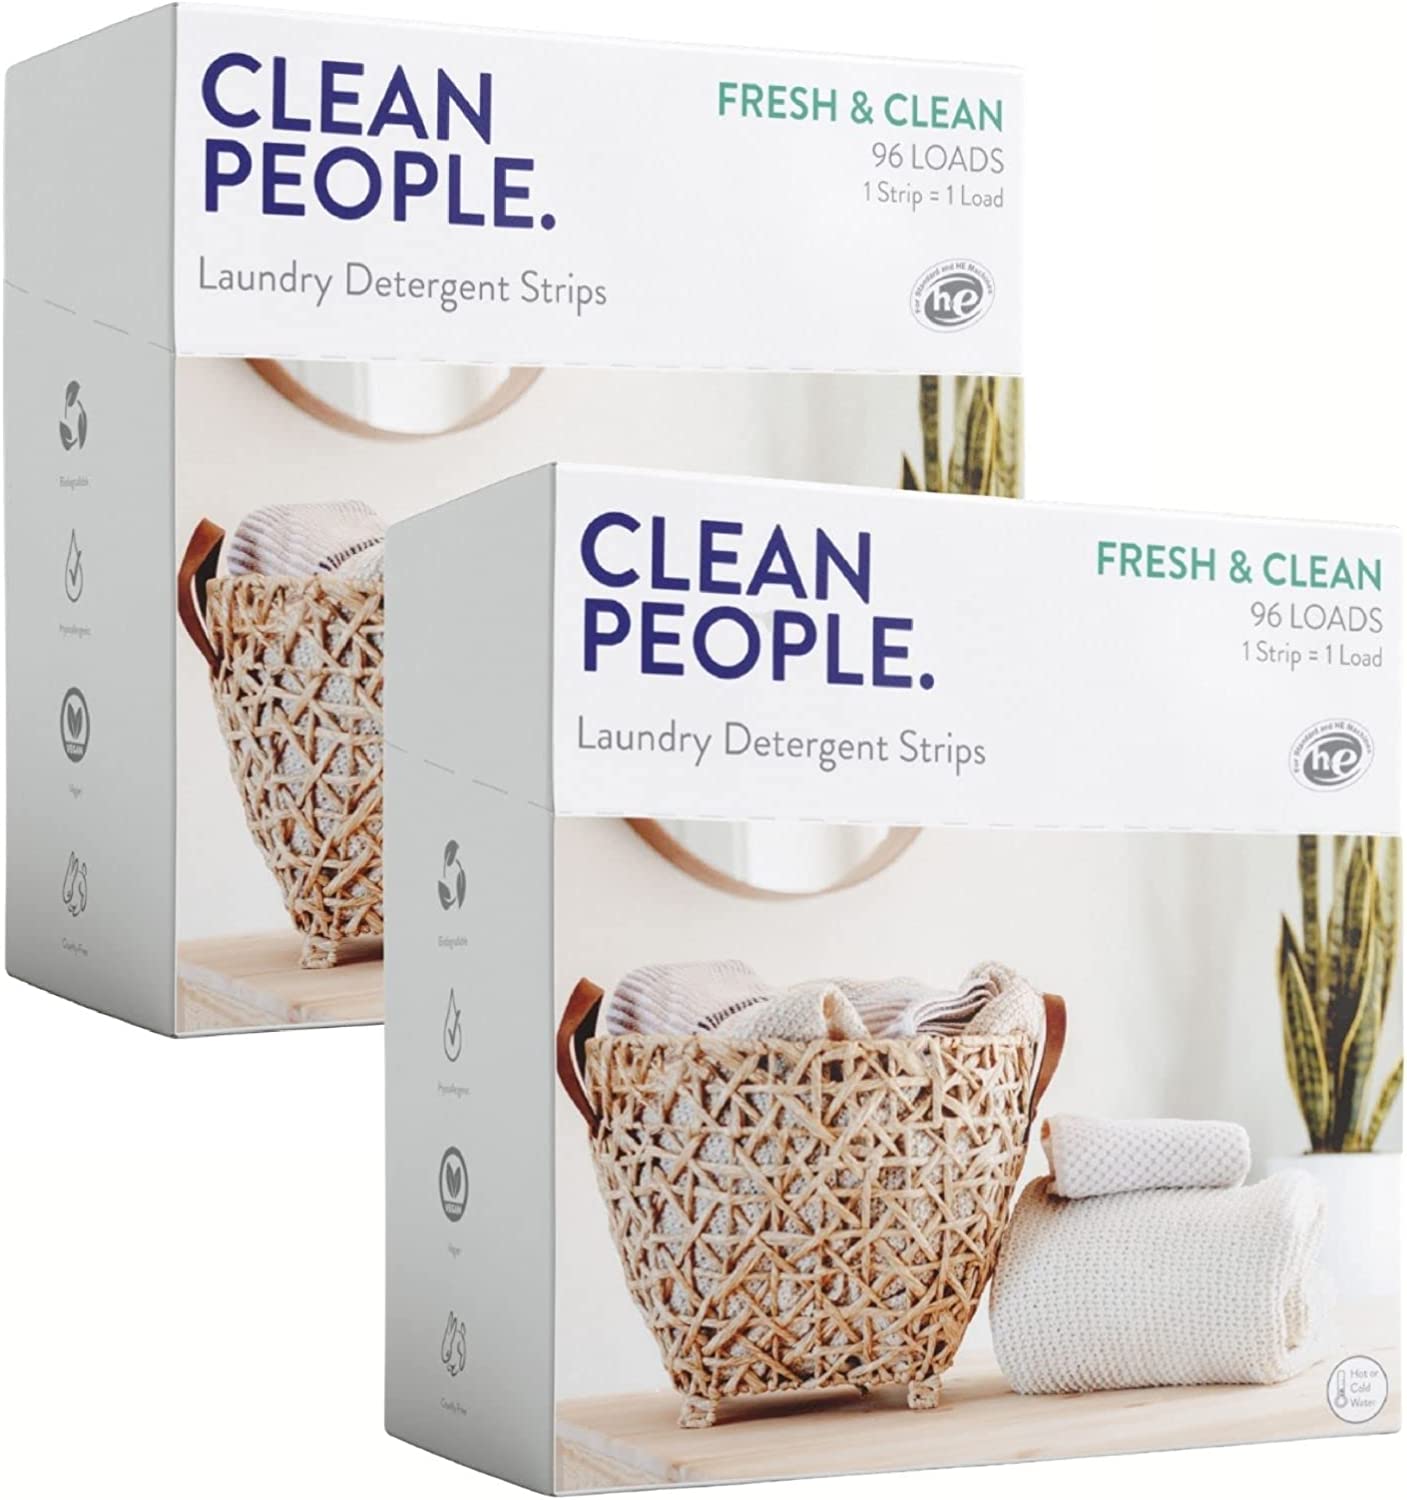 Clean People Concentrated Laundry Detergent Sheets- Plastic Free Packaging, Natural Plant-Based Ingredients, Stain Fighting, Works with All Machines